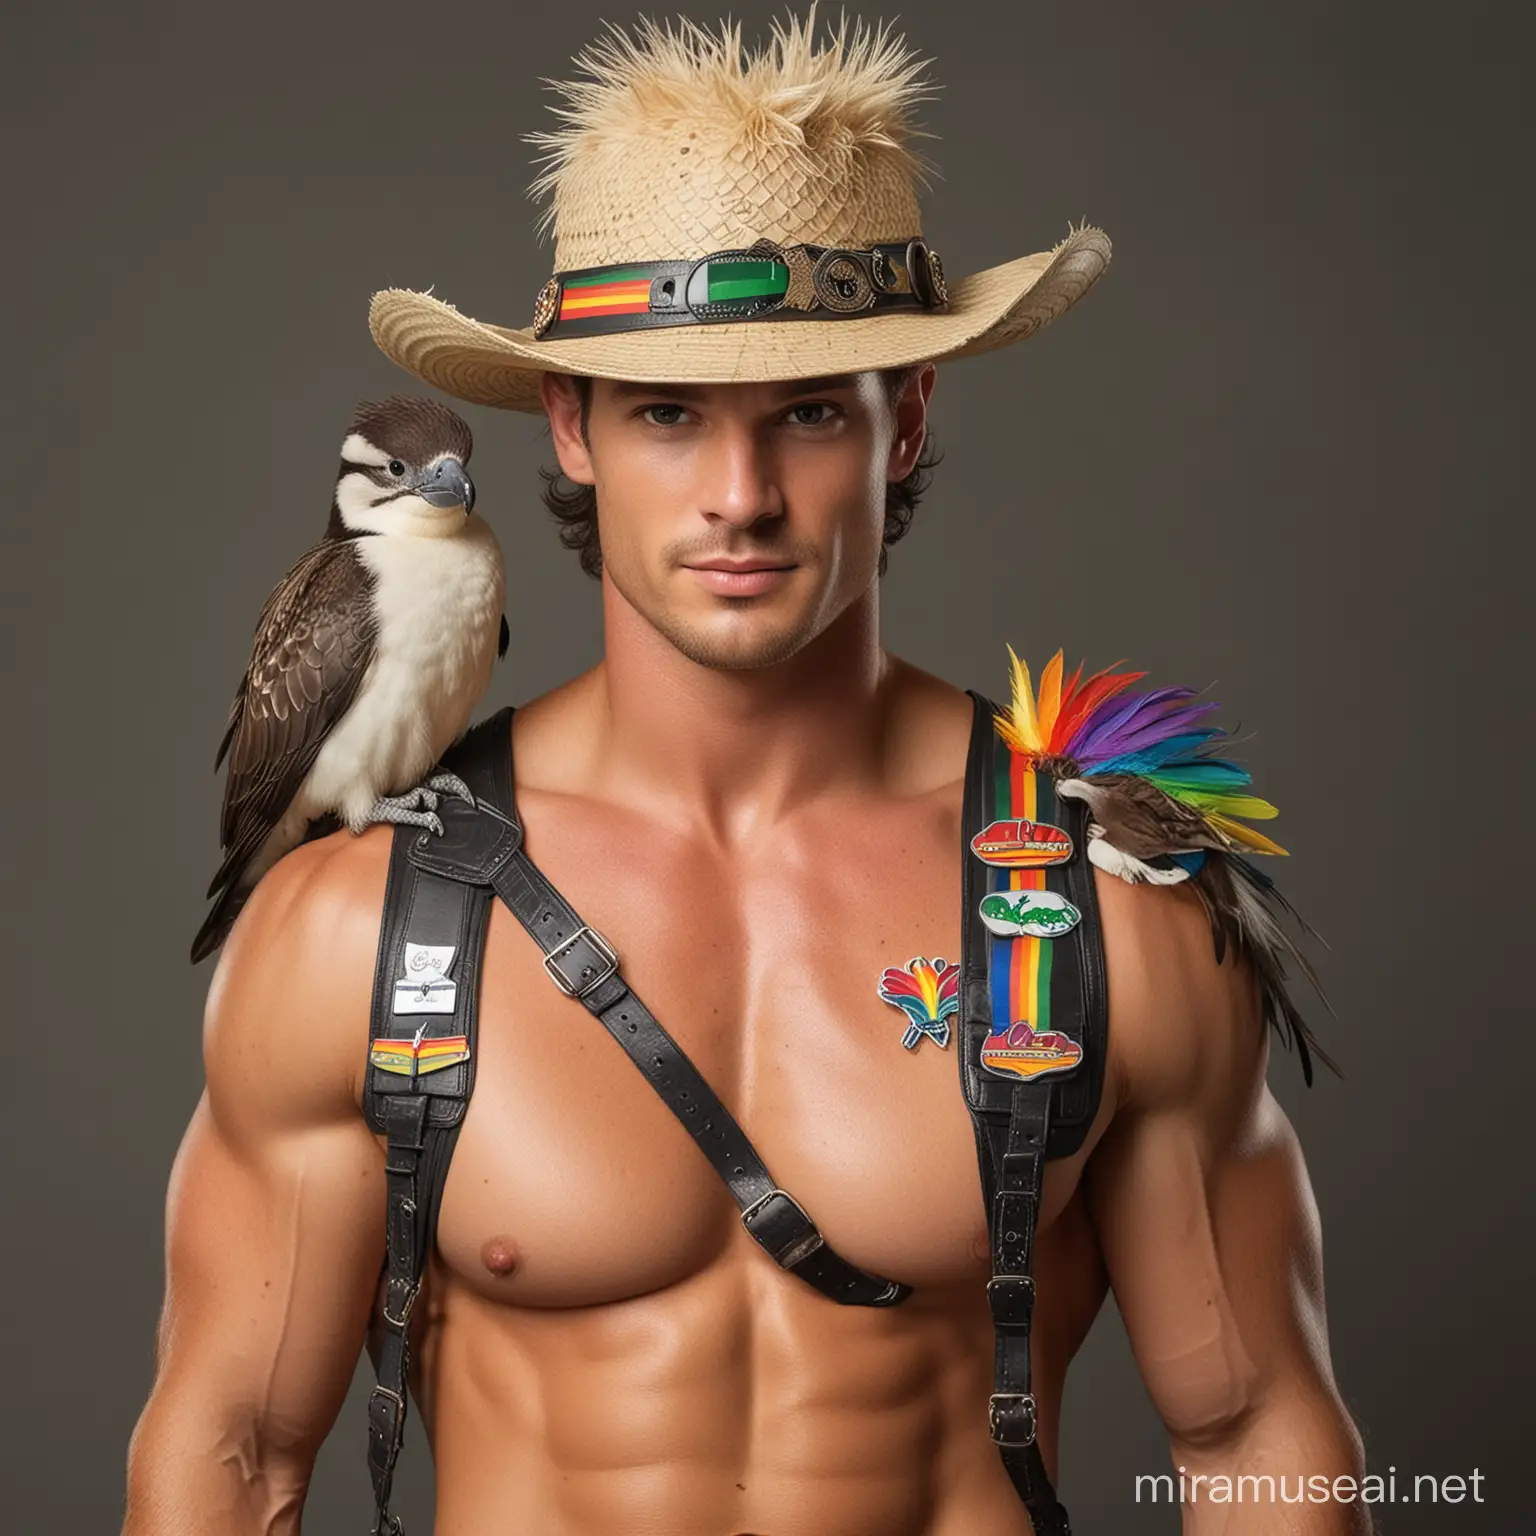 Strong Fit Handsome Guy in half dressed crocodile dundee Outfit with Rainbow Badges and a Kookaburra on his shoulder